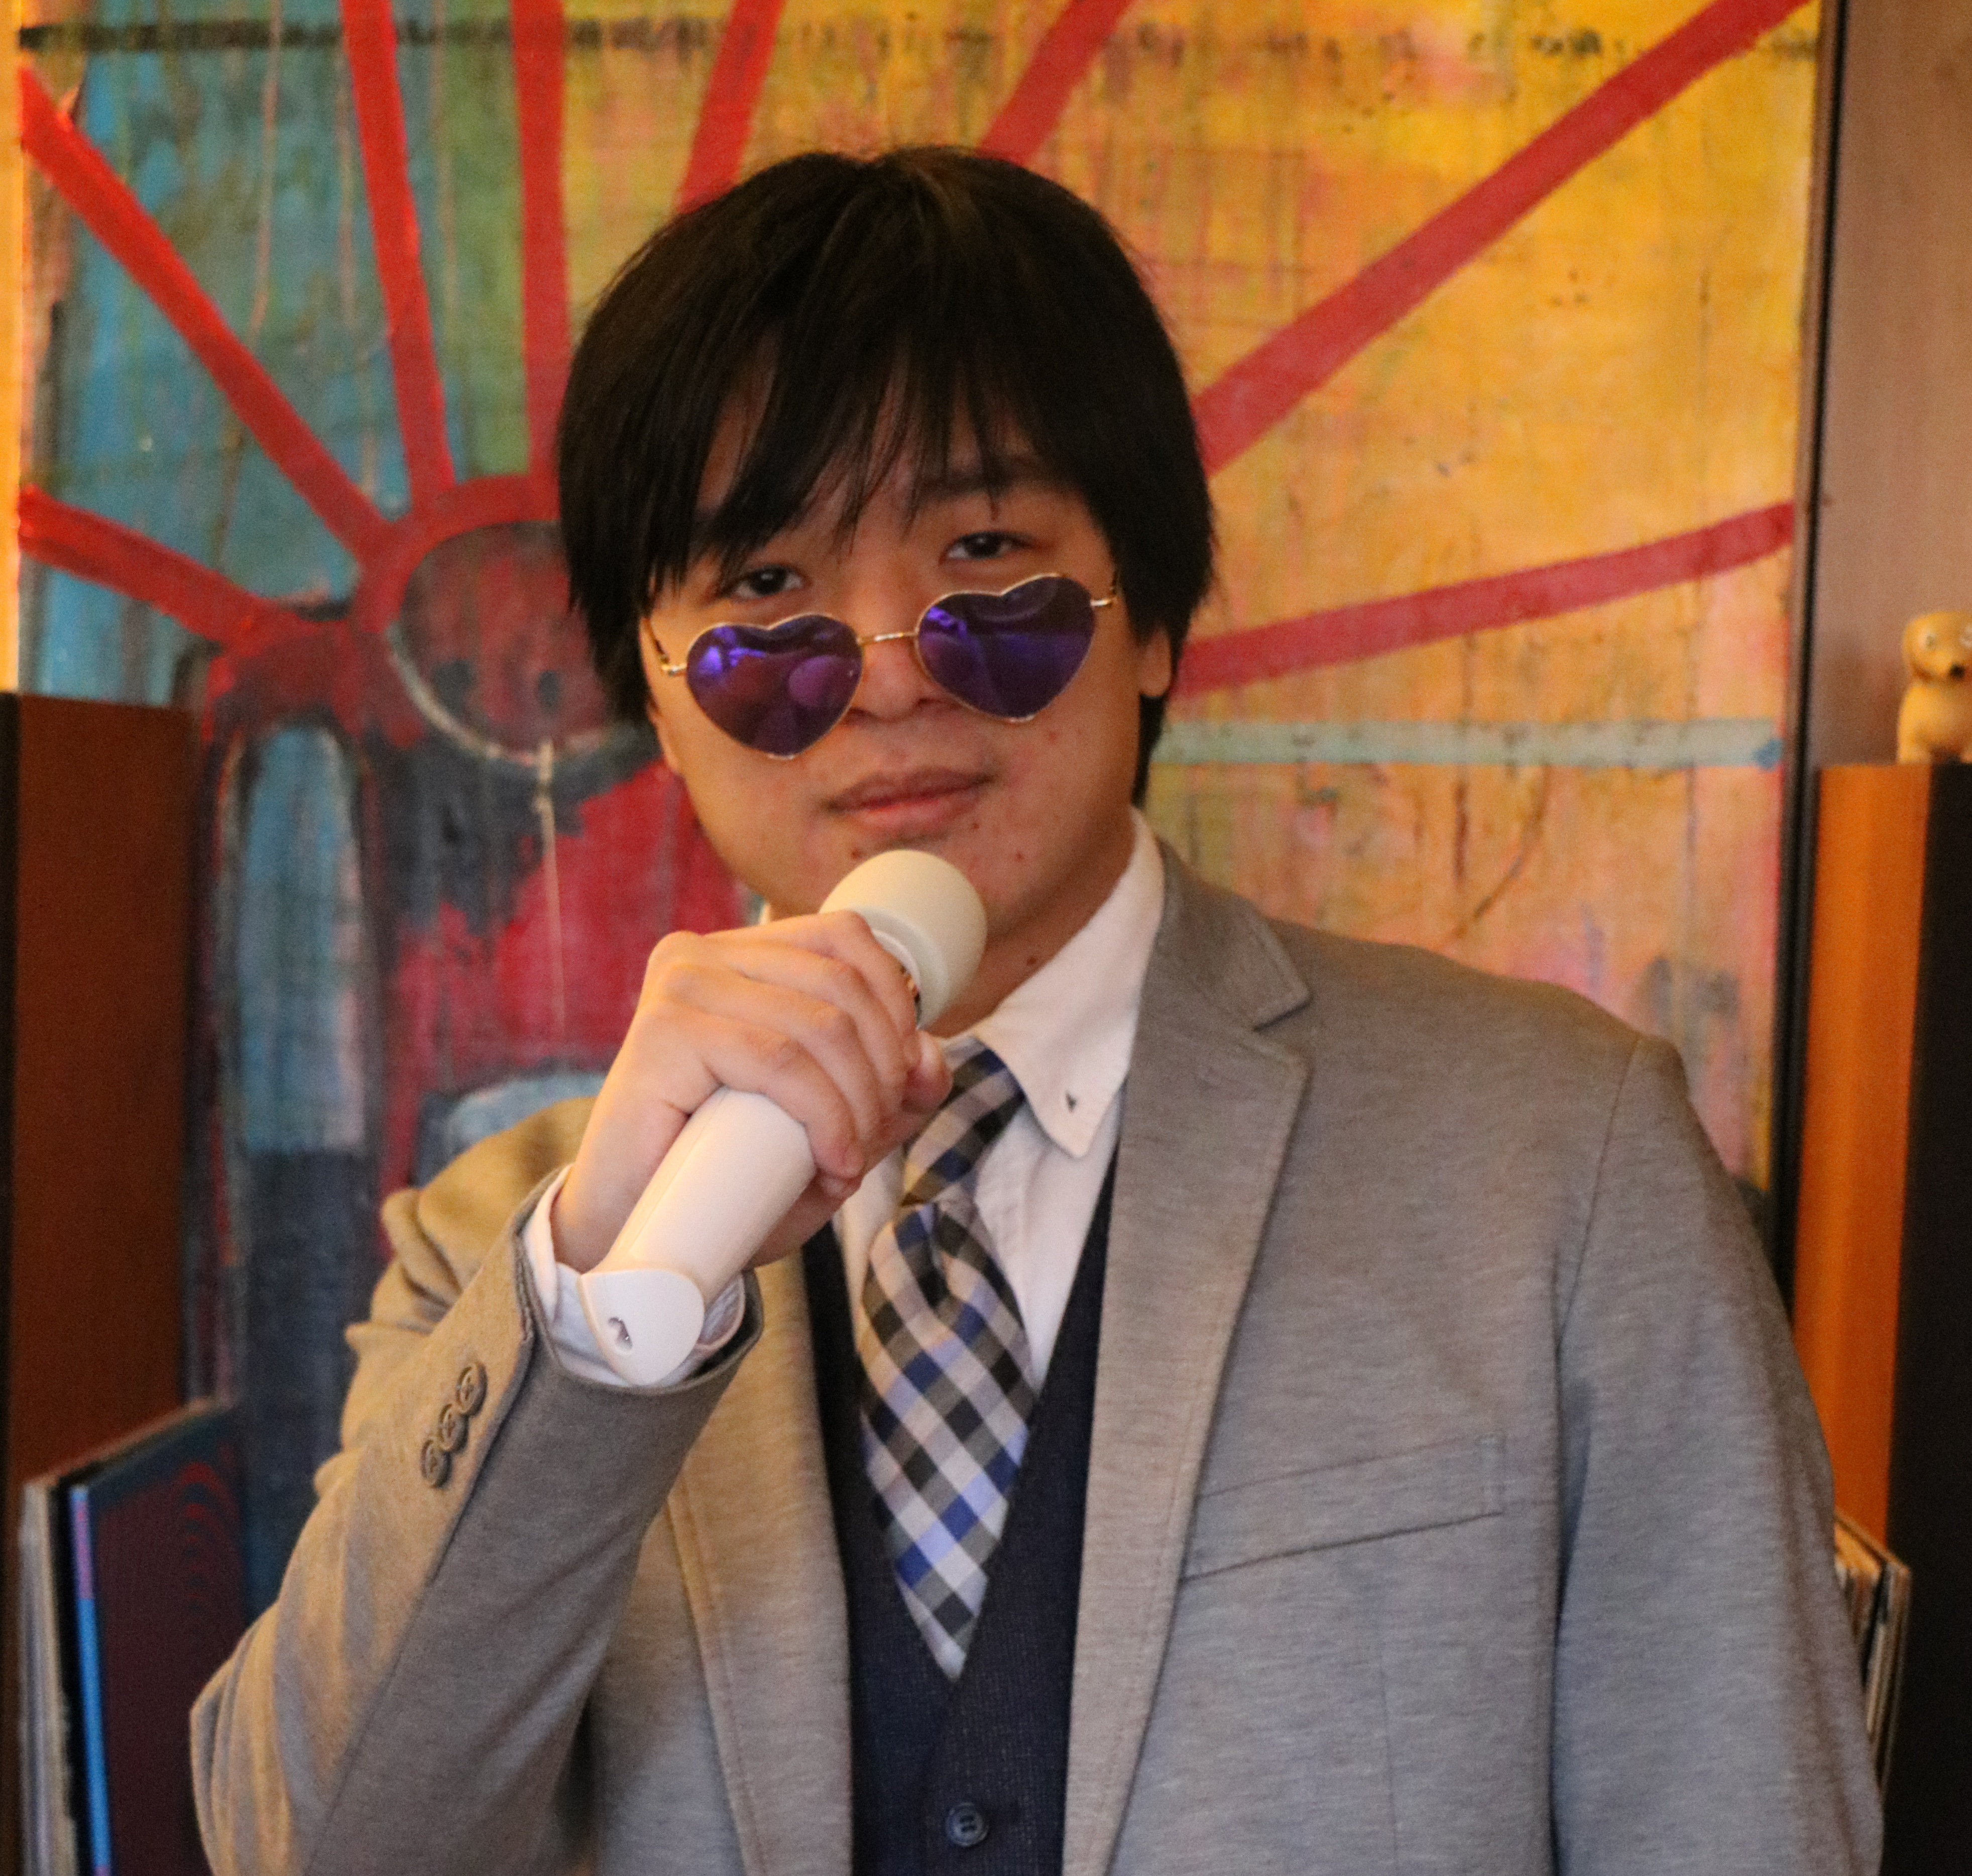 An asian man speaks into a microphone with purple heart shaped glasses on